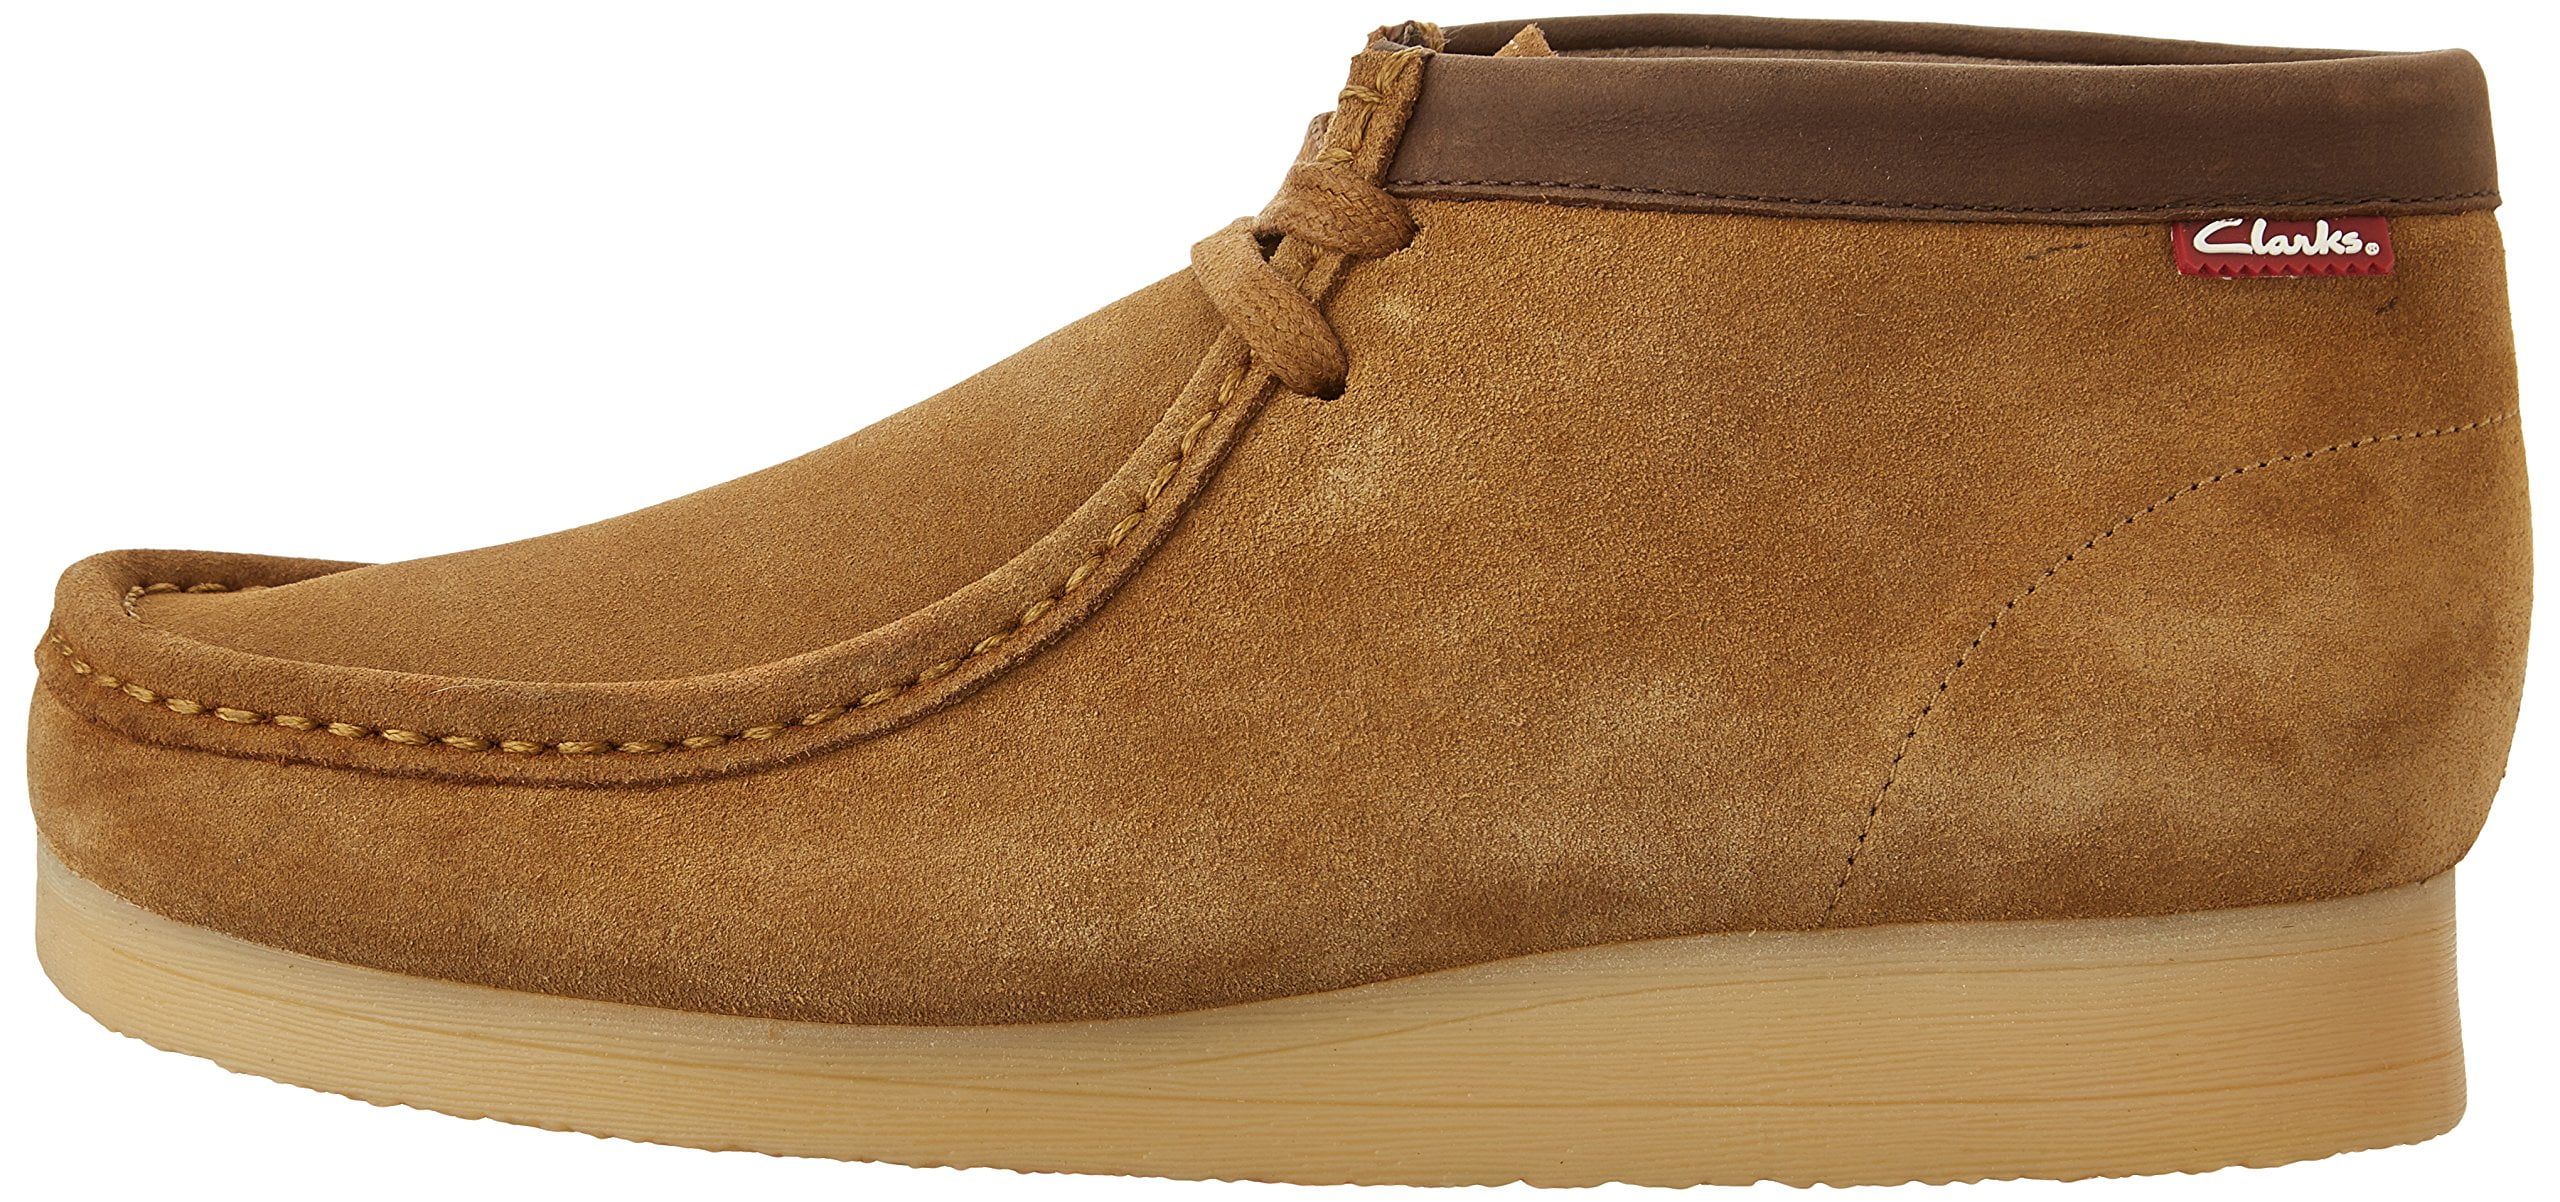 wheat clarks wallabees